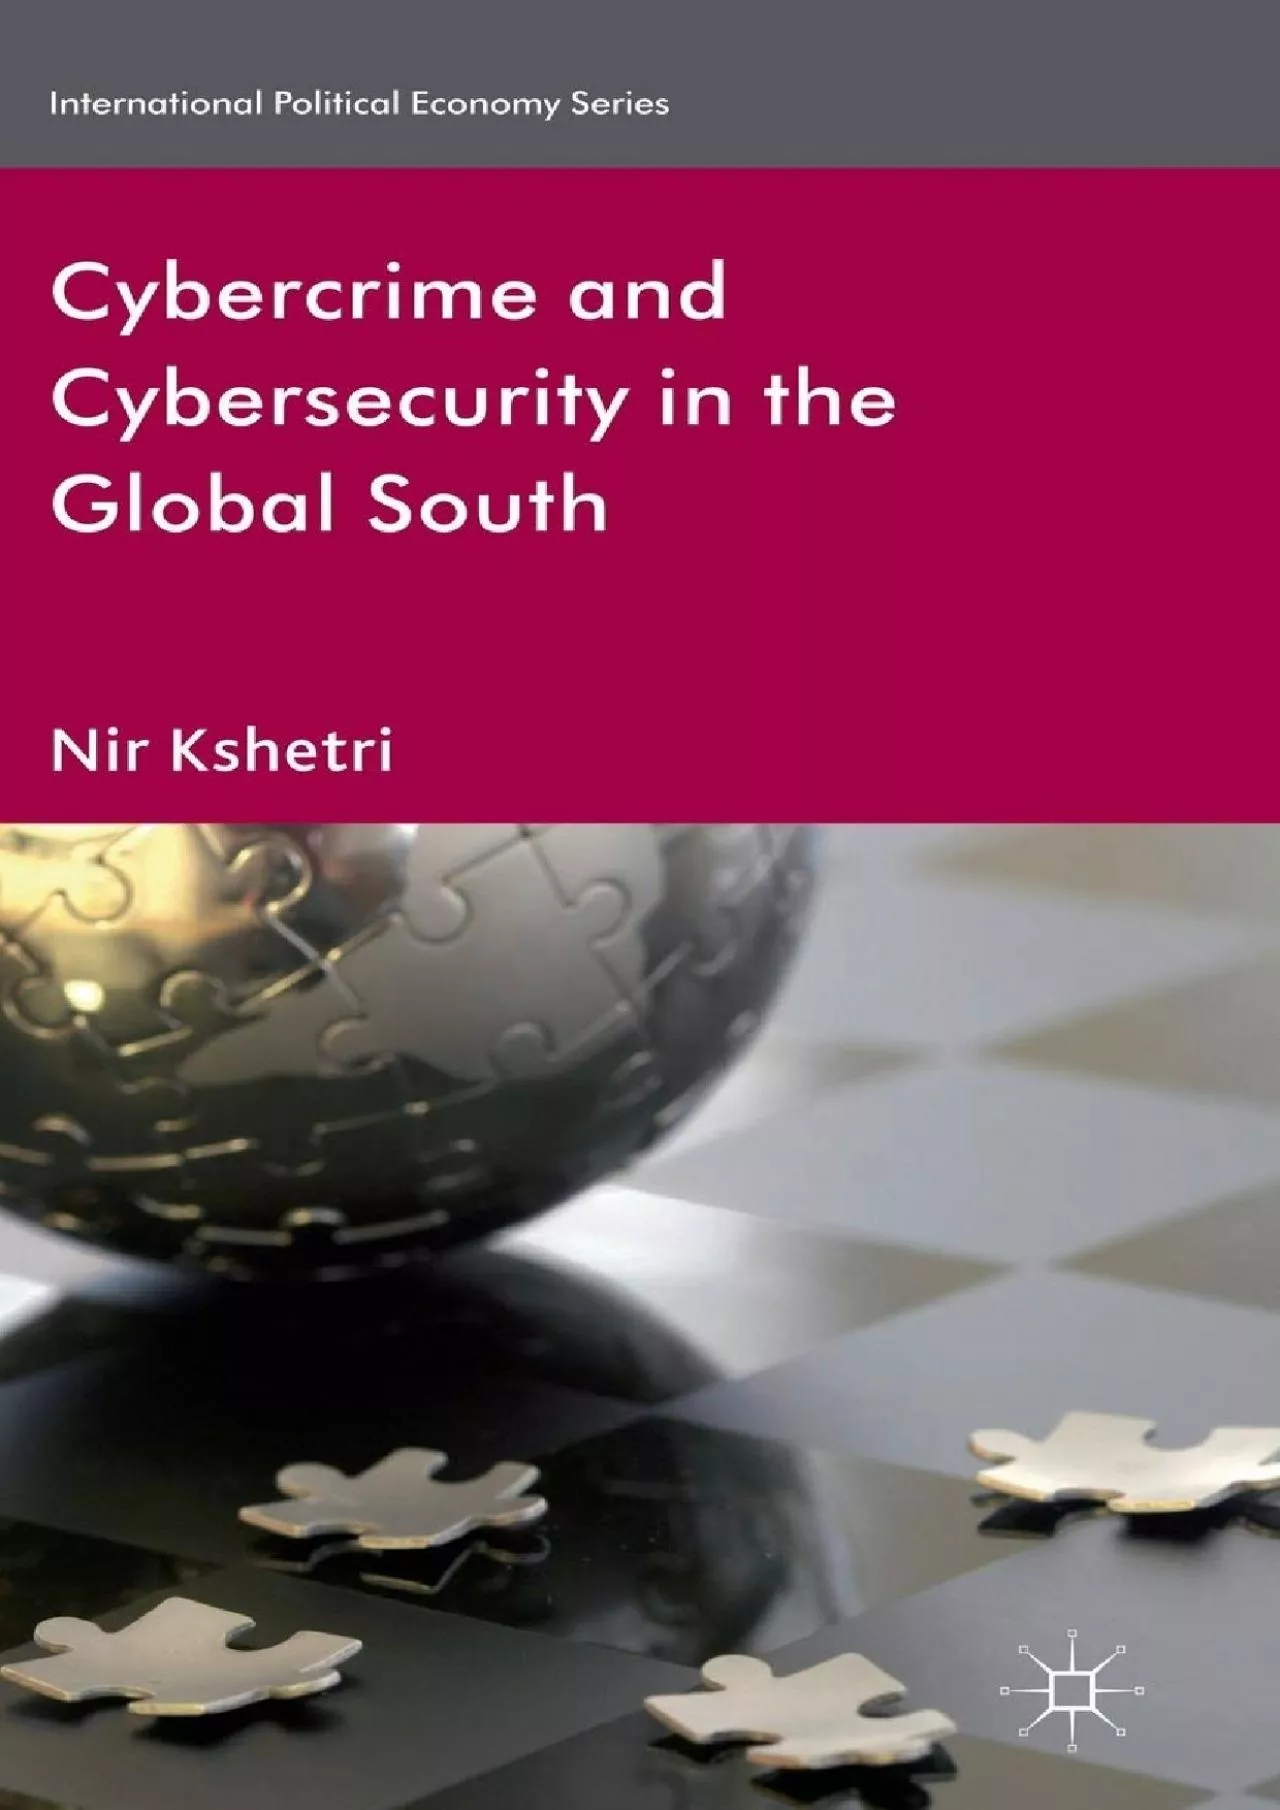 [DOWLOAD]-Cybercrime and Cybersecurity in the Global South (International Political Economy